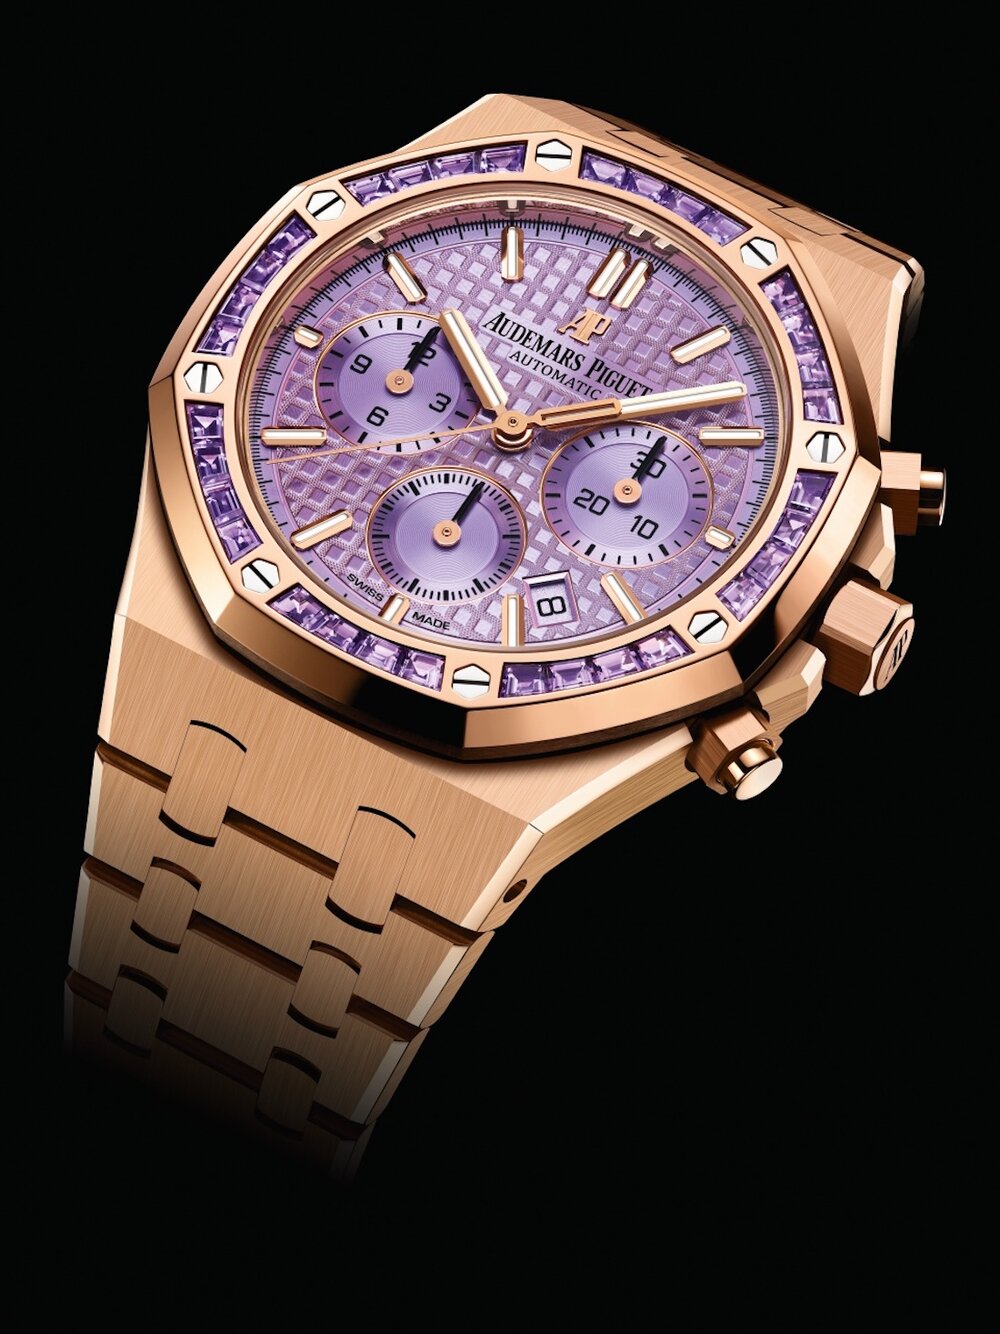 Audemars Piguet’s Royal Oak Amethyst Self-winding Chronograph plays with colour and light